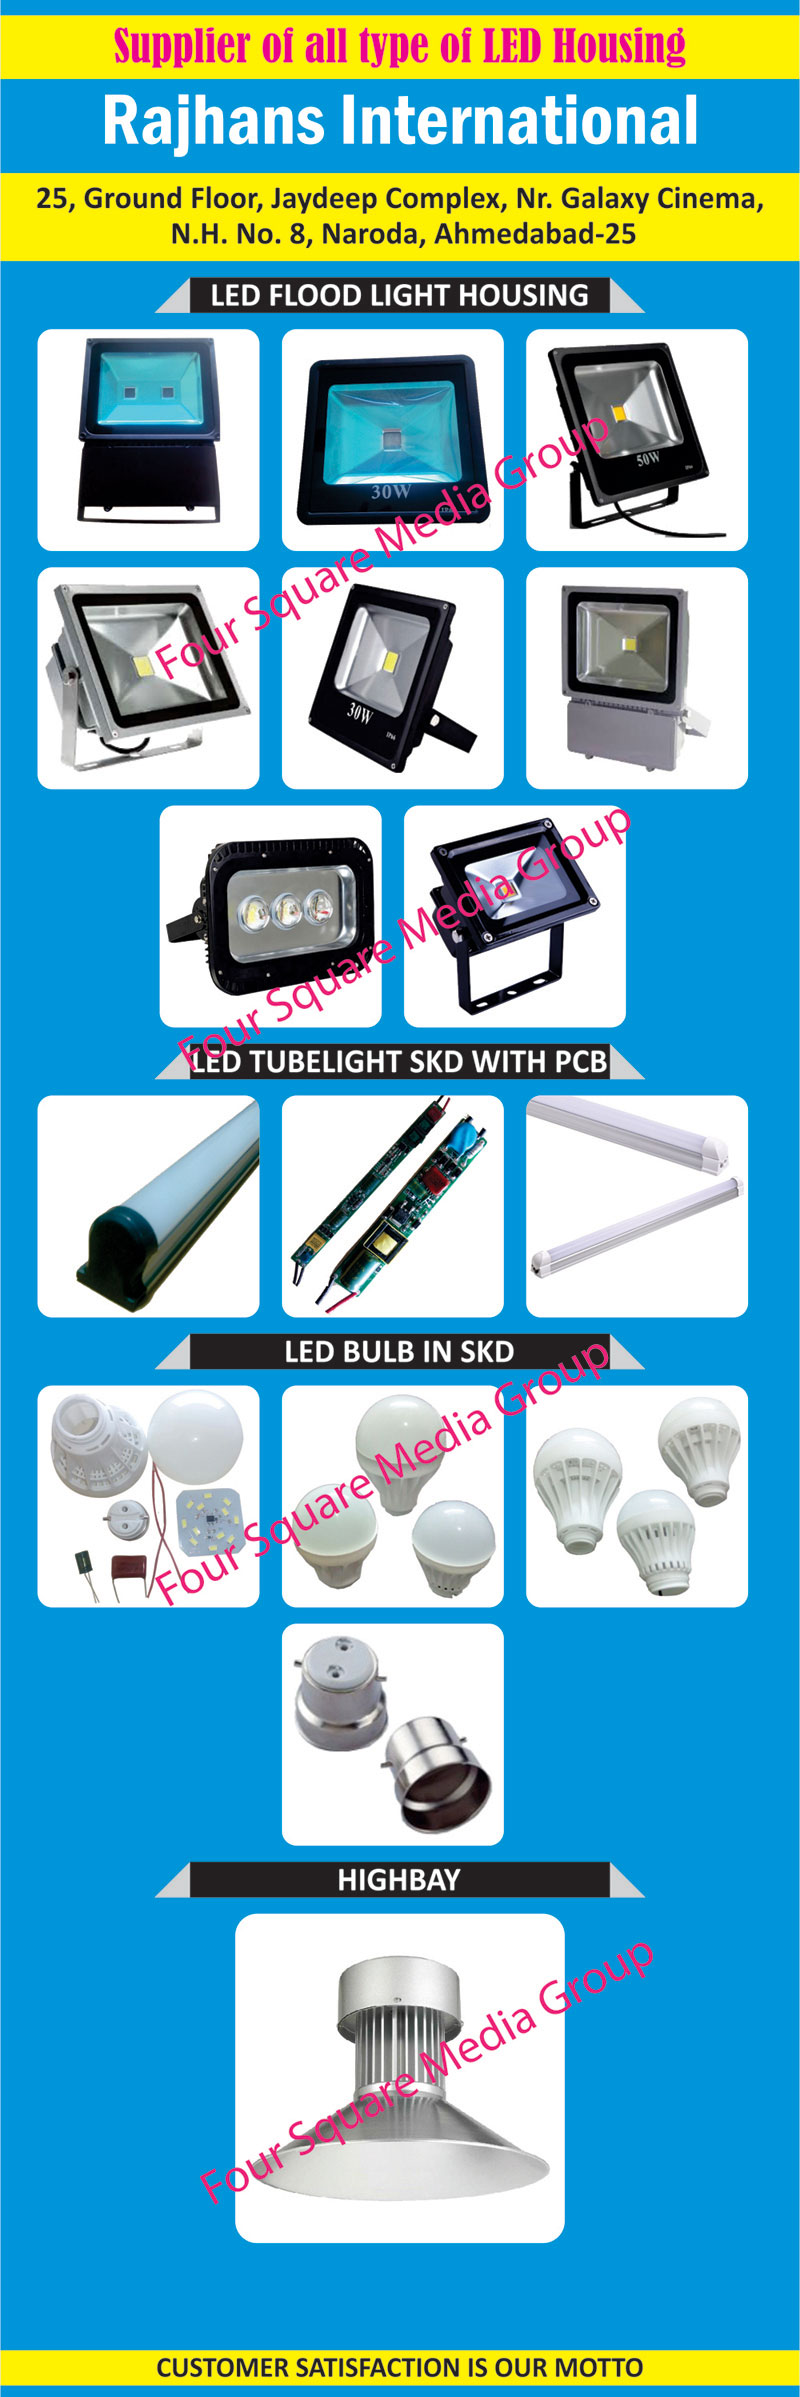 Led Light Accessories, Led Drivers, Street Light Fixture, MCPCB, Led Down lights, White Acrylic Tube, Philips Led Heat Sink, Philips Led Disk, Philips DLM, Philips Led Disk DLM, Philips DLM Fixtures, Led Housing, Led Flood Light Housing, Led Tube Light SKD With Printed Circuit Boards, Led Bulb in SKD, High Bay Lights